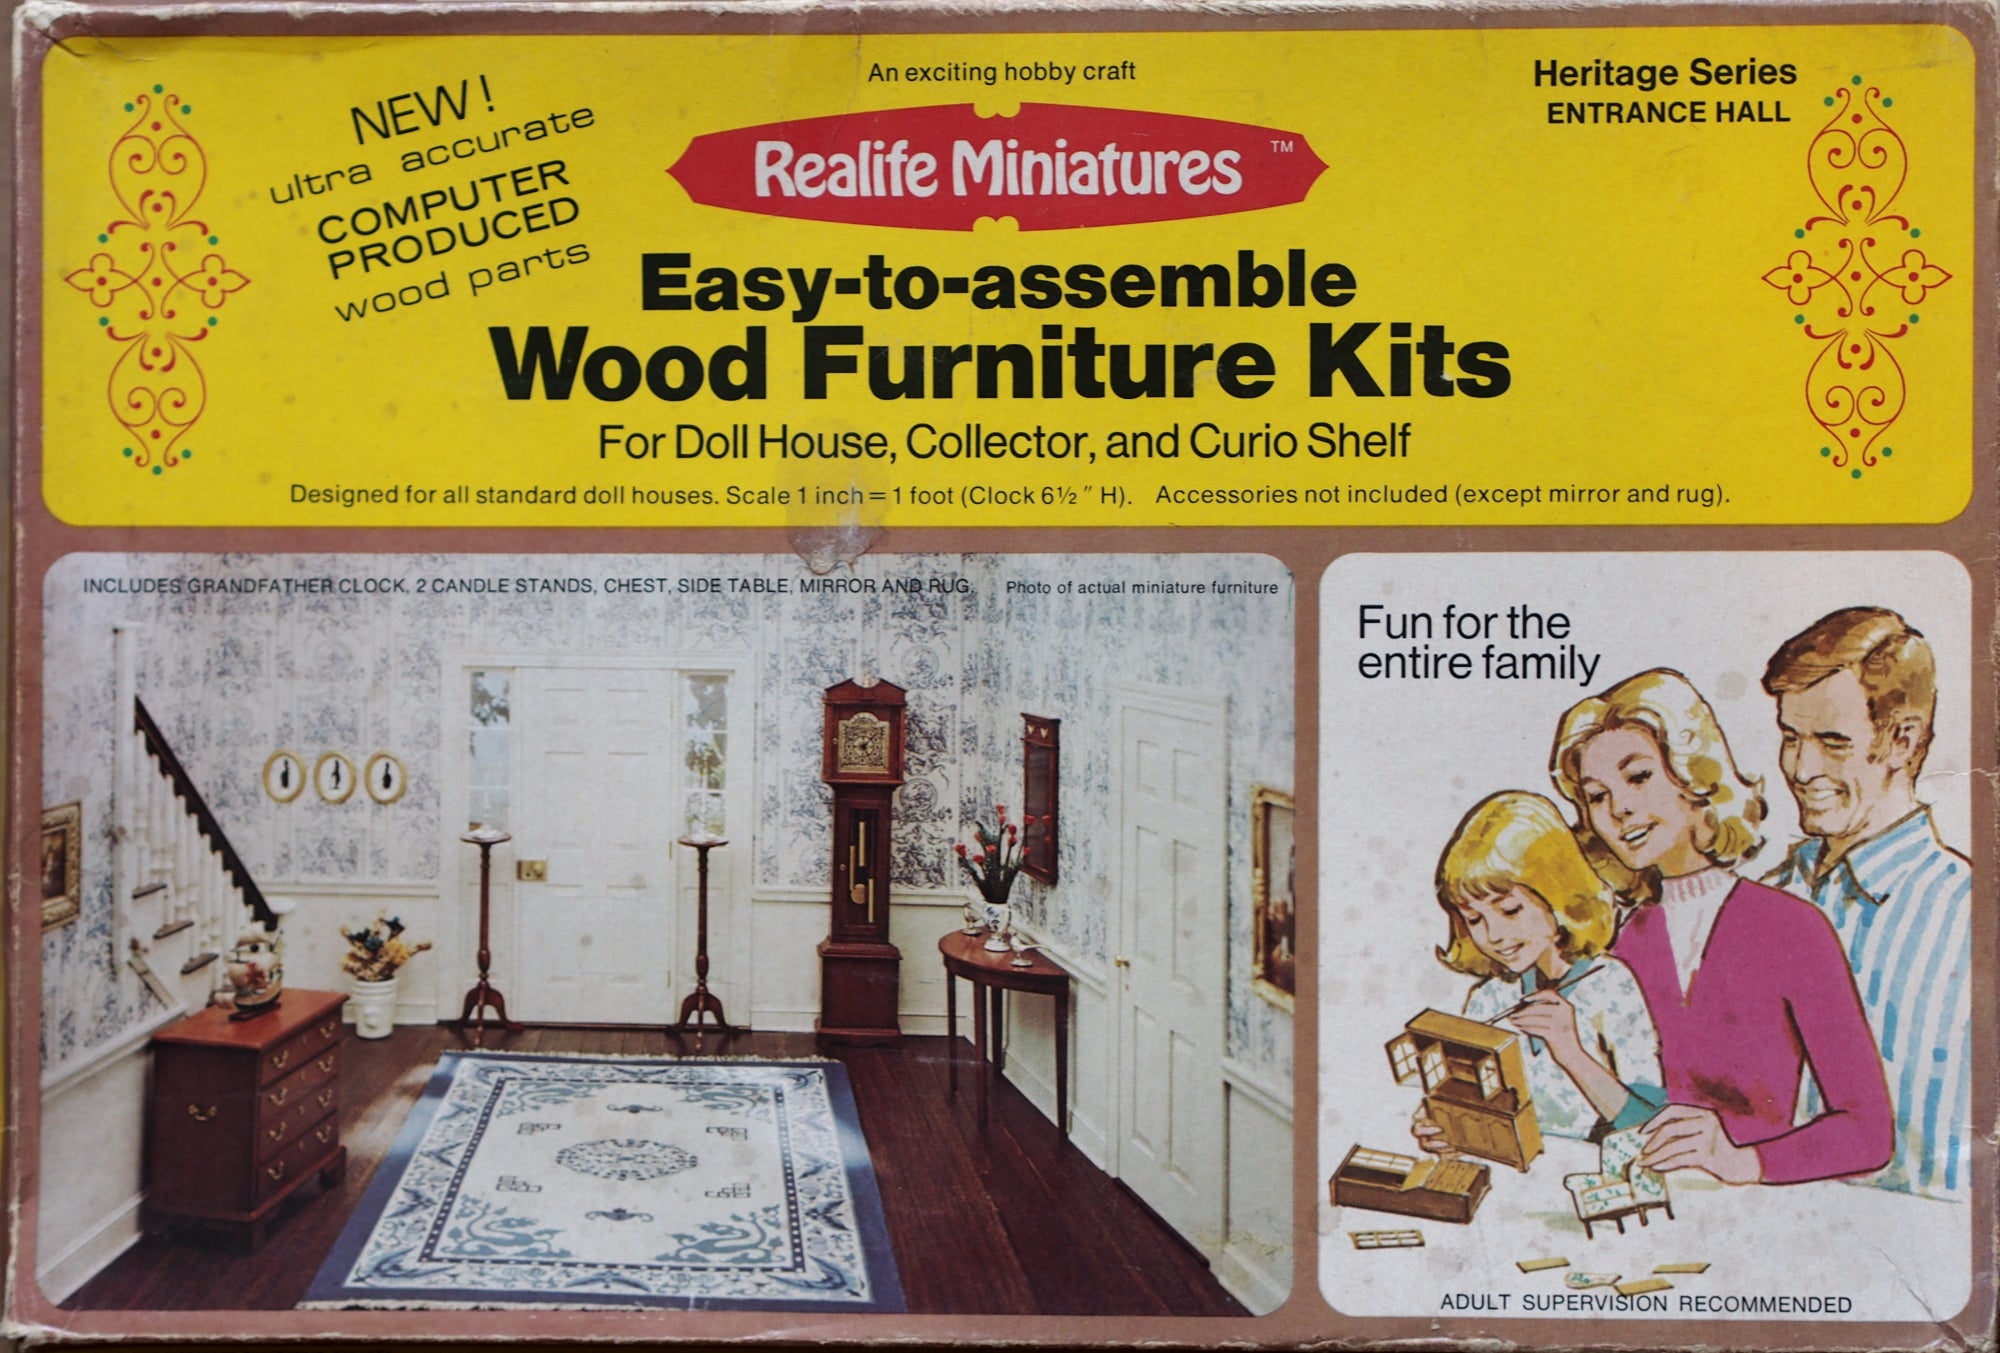 Realife Miniature Furniture Kit # 196 Heritage Series Entrance Hall DIY Dollhouse by Scientific Models Miniatures